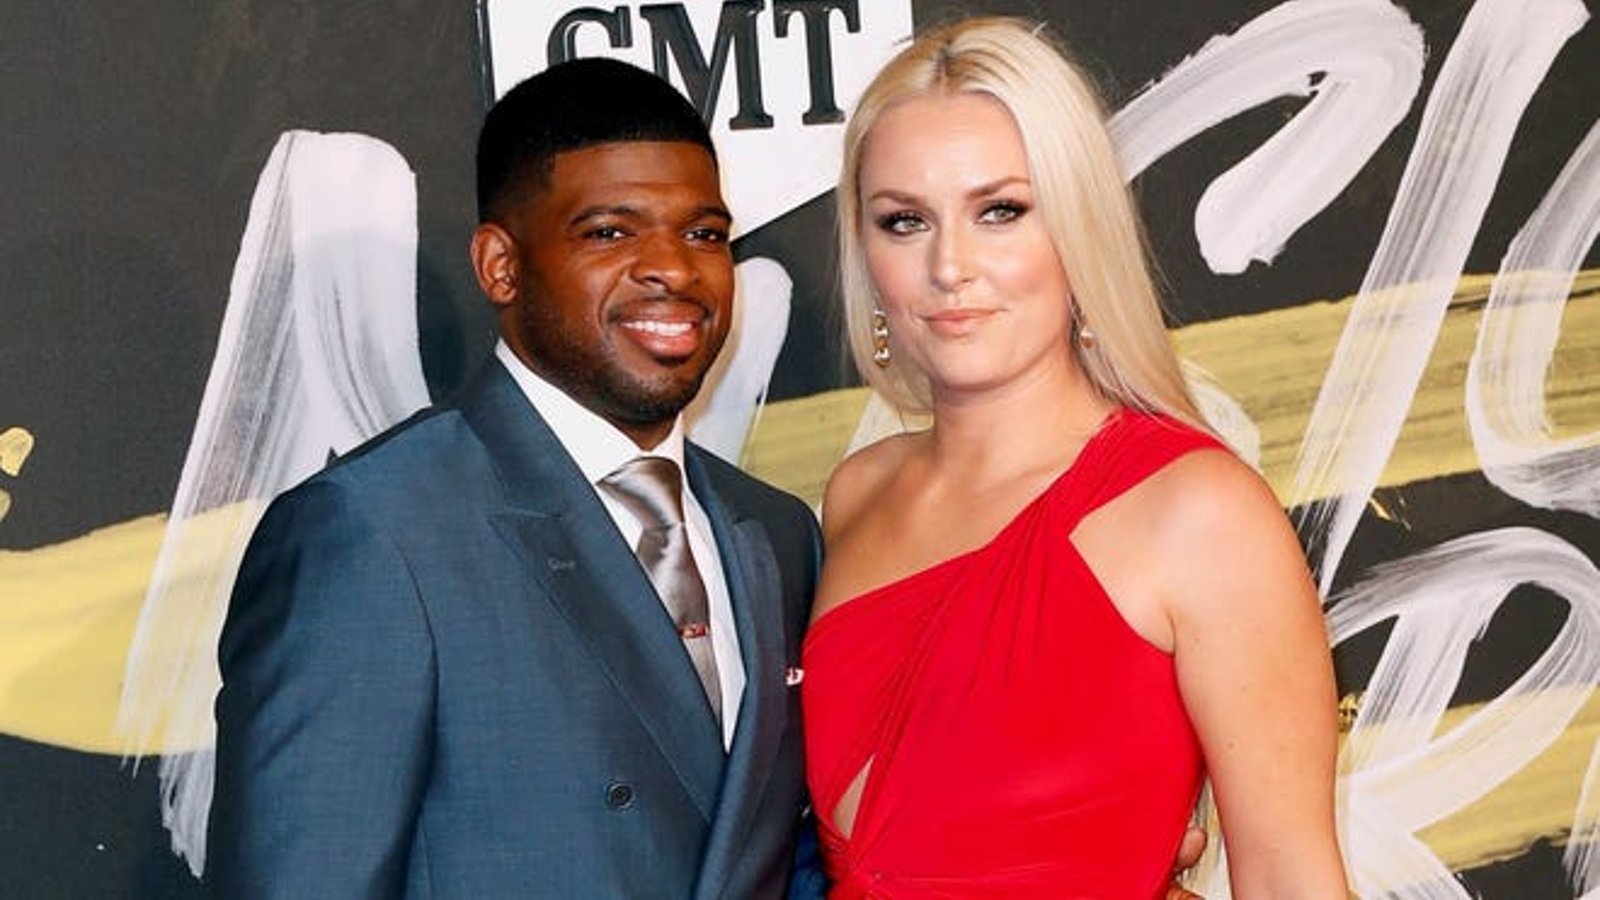 P.K. Subban and Lindsey Vonn have broken up after three years together